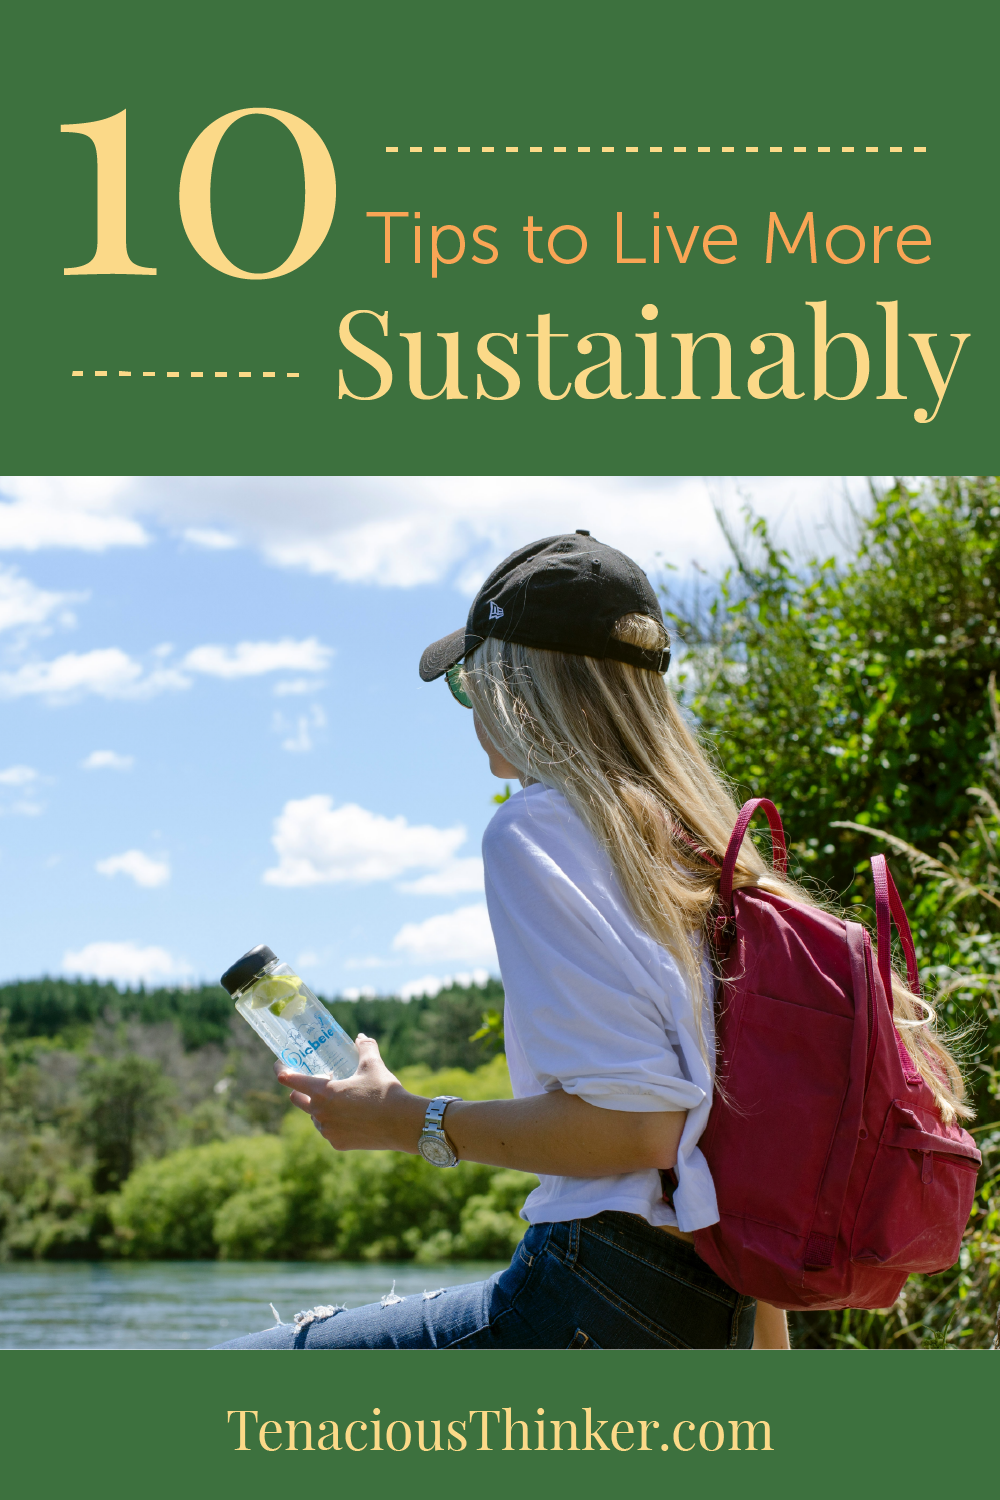 10 Tips to live more sustainably image of a woman outside in nature with a reusable waterbottle